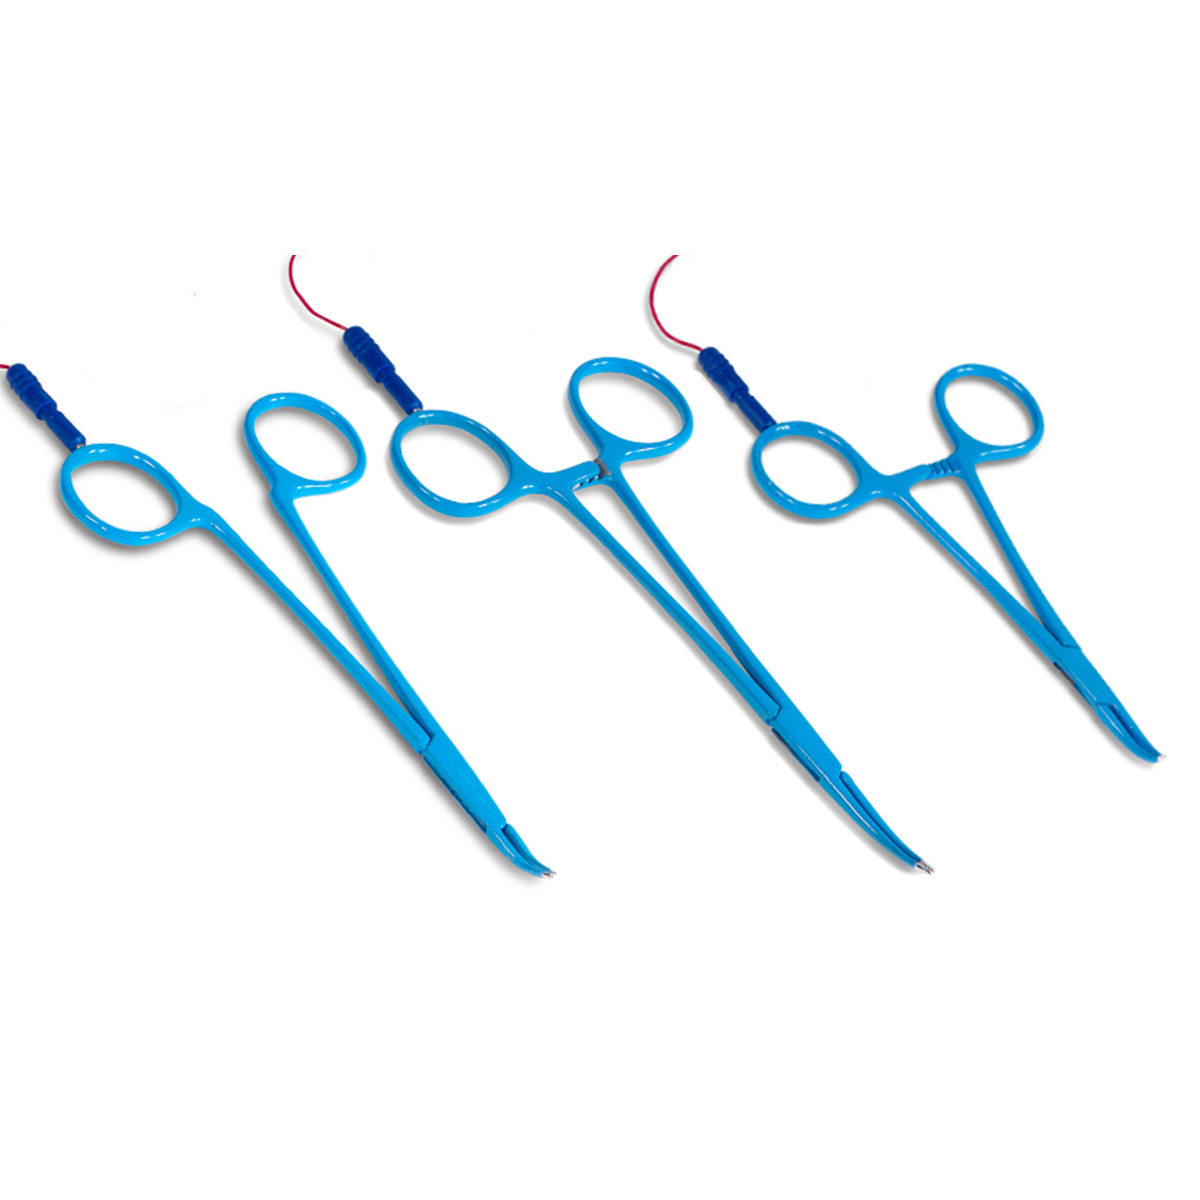 Scorpion surgical forceps are integrated with EMG stimulation for Intraoperative Neuromonitoring